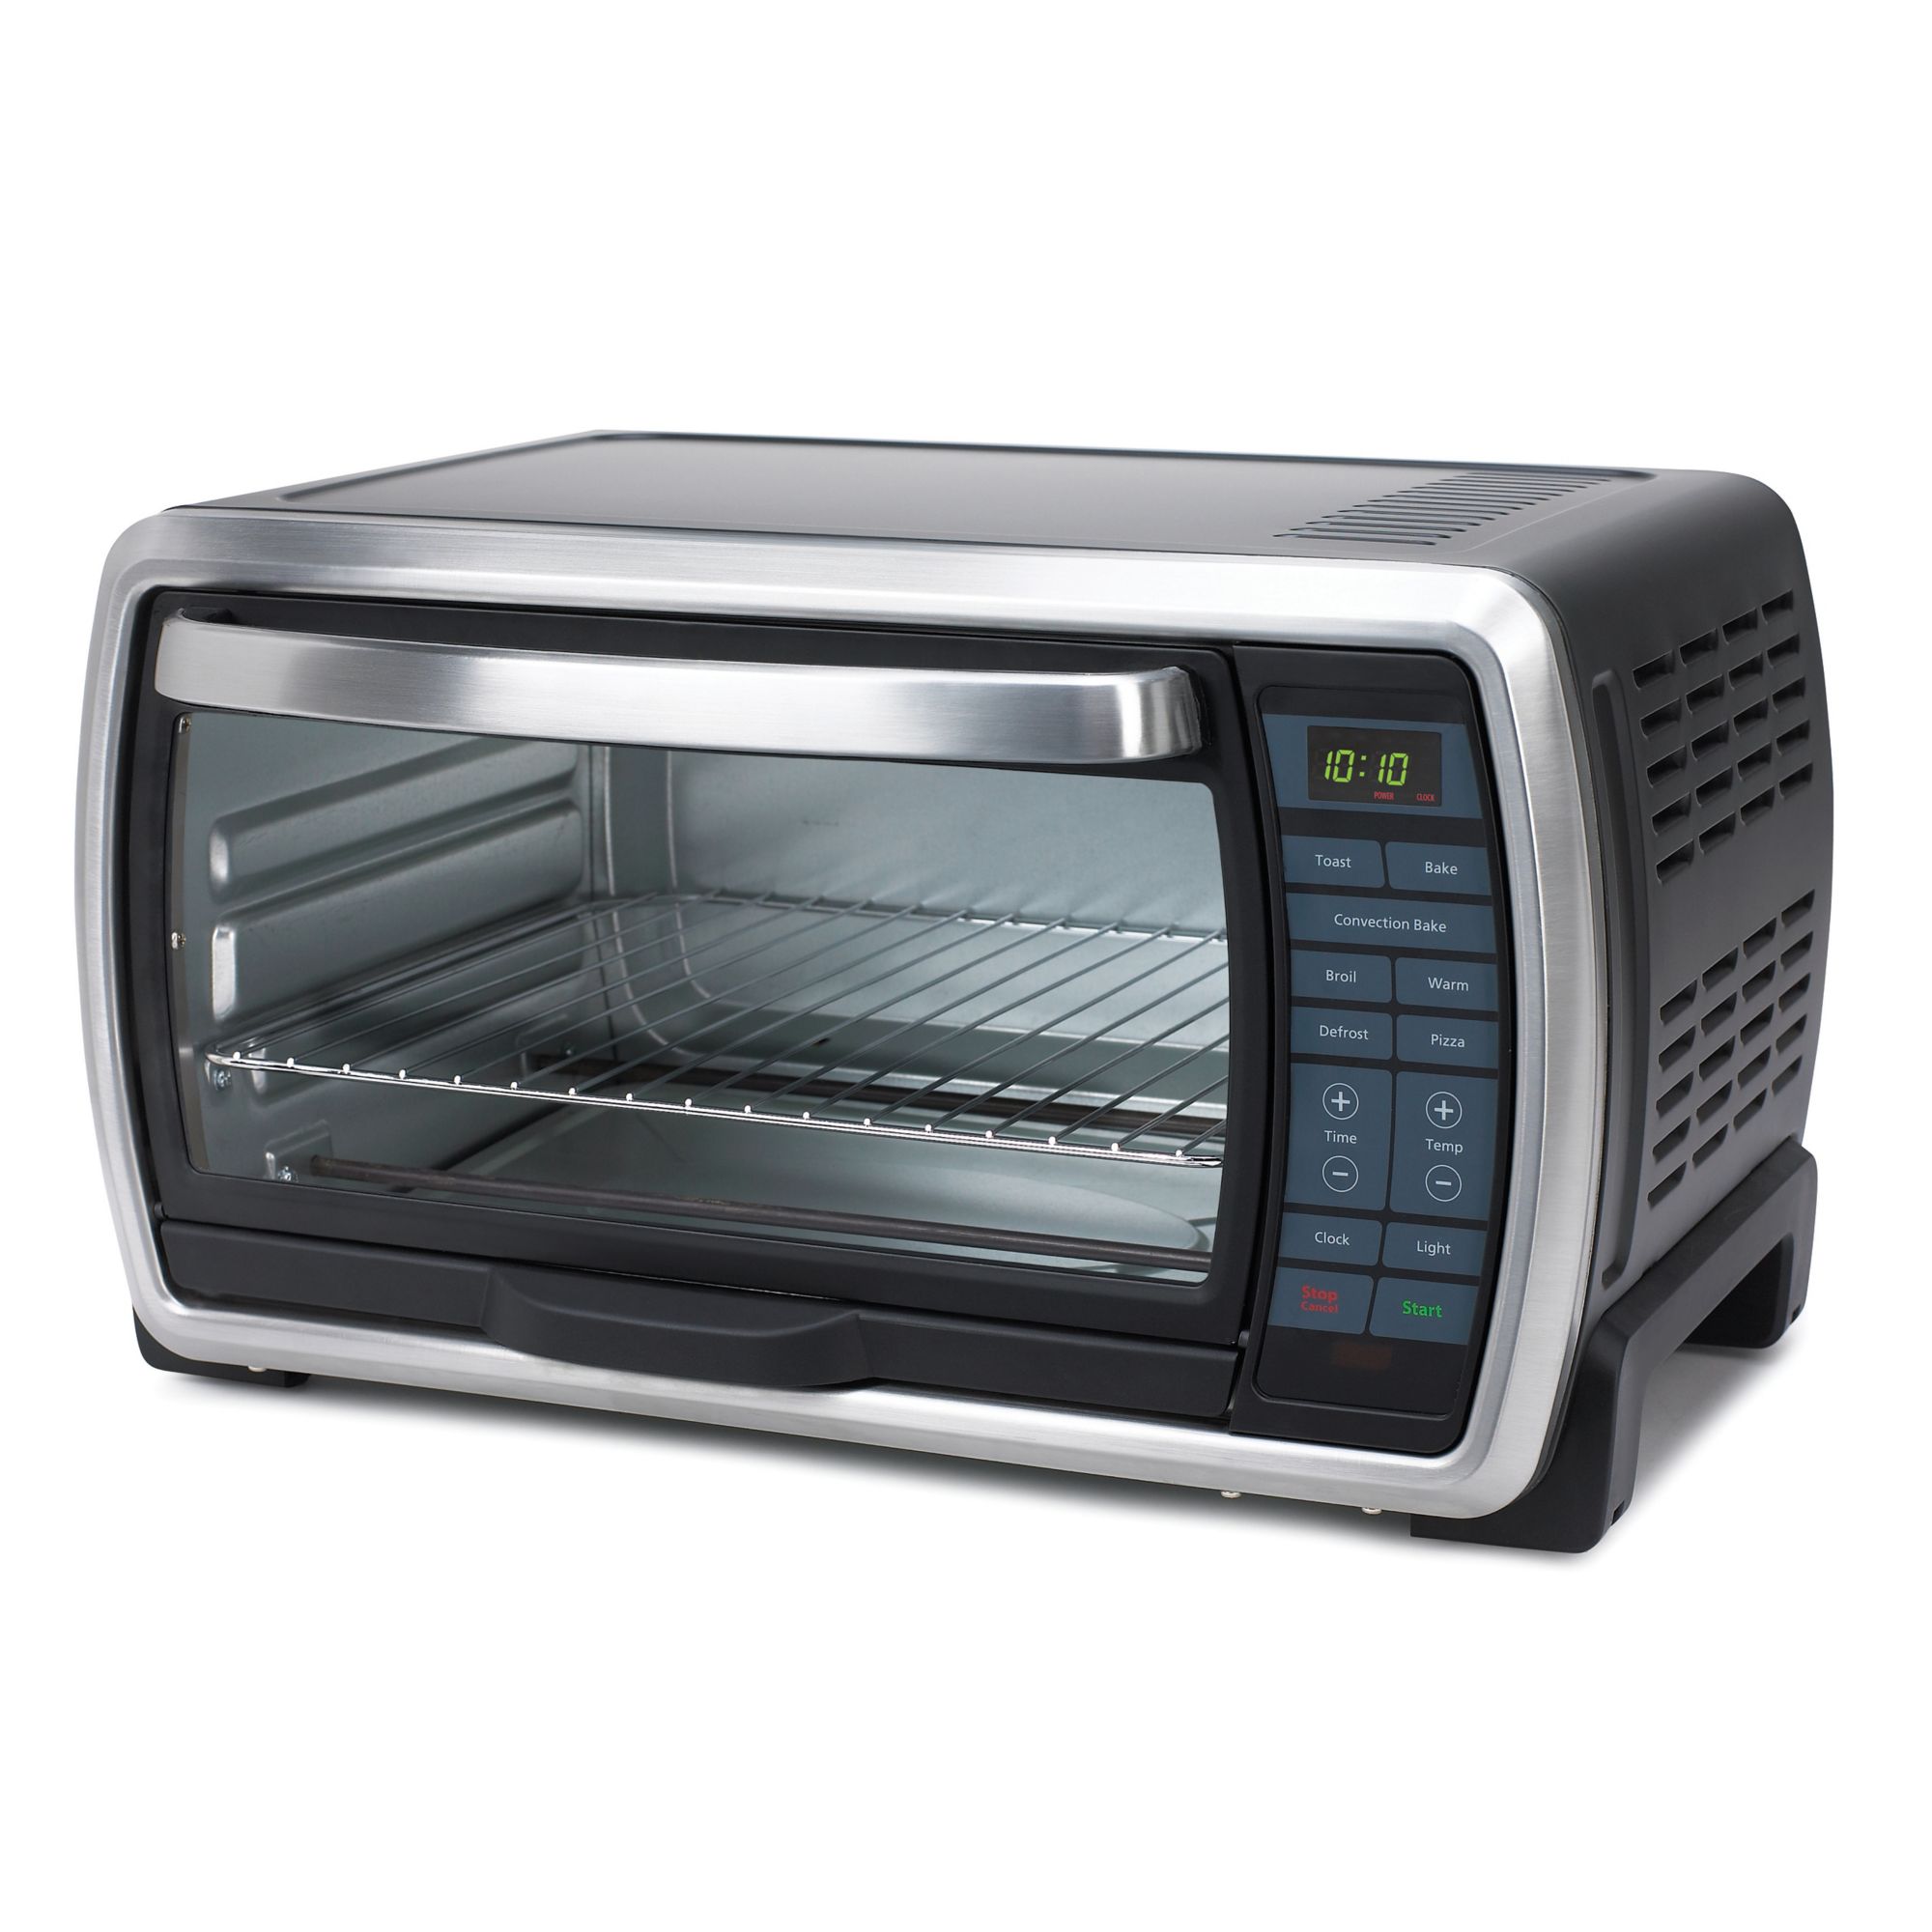 Oster Extra Large Digital Countertop Convection Oven, Stainless Steel (tssttvdgxl-shp)